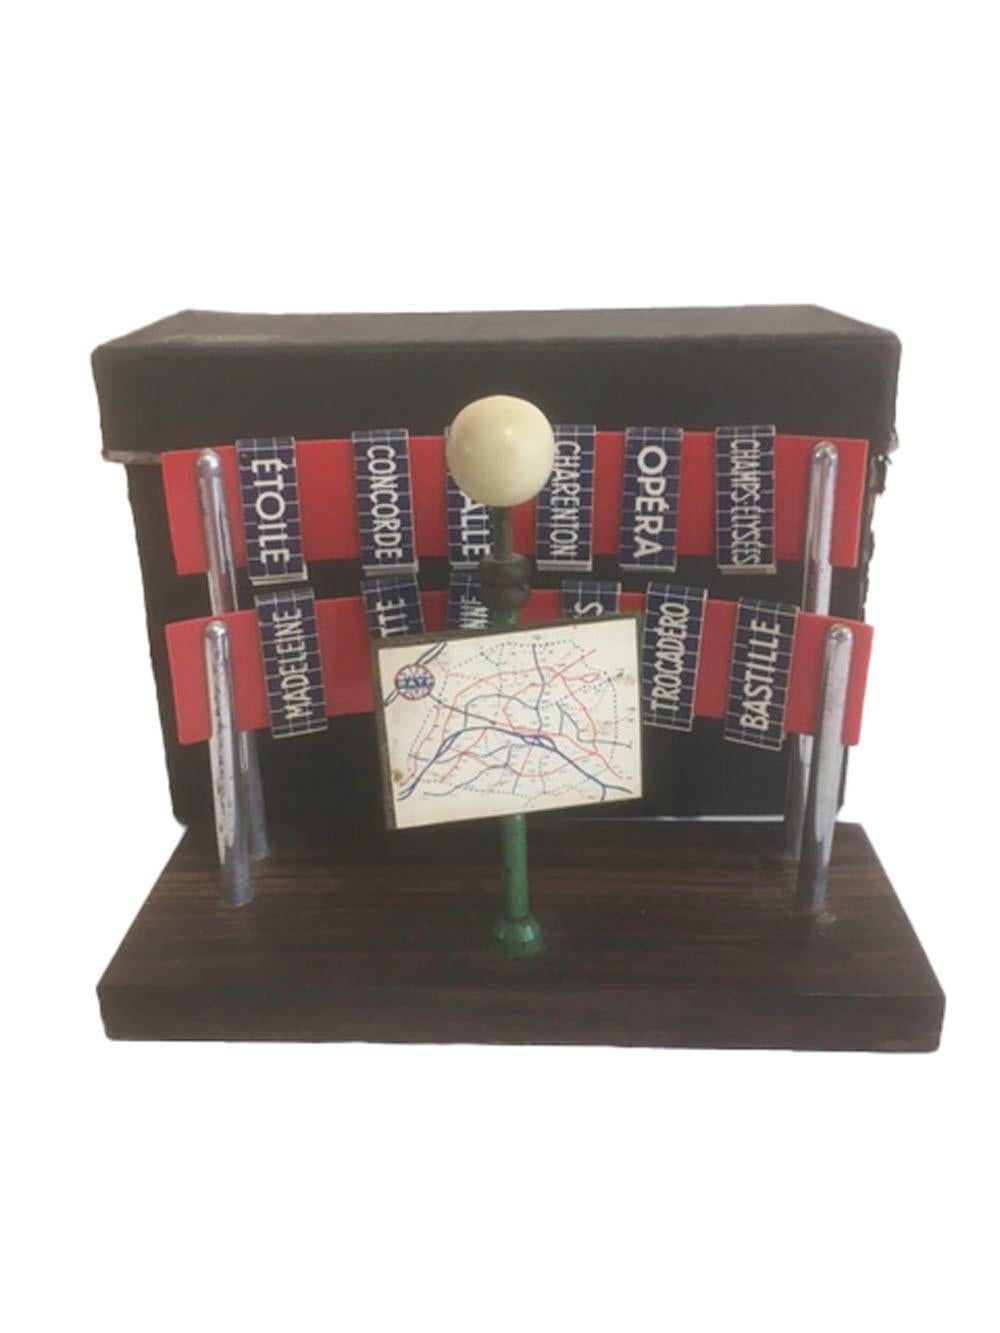 French Art Deco, Paris Metro Theme, Drinks Markers and Stand with Map of Paris Metro